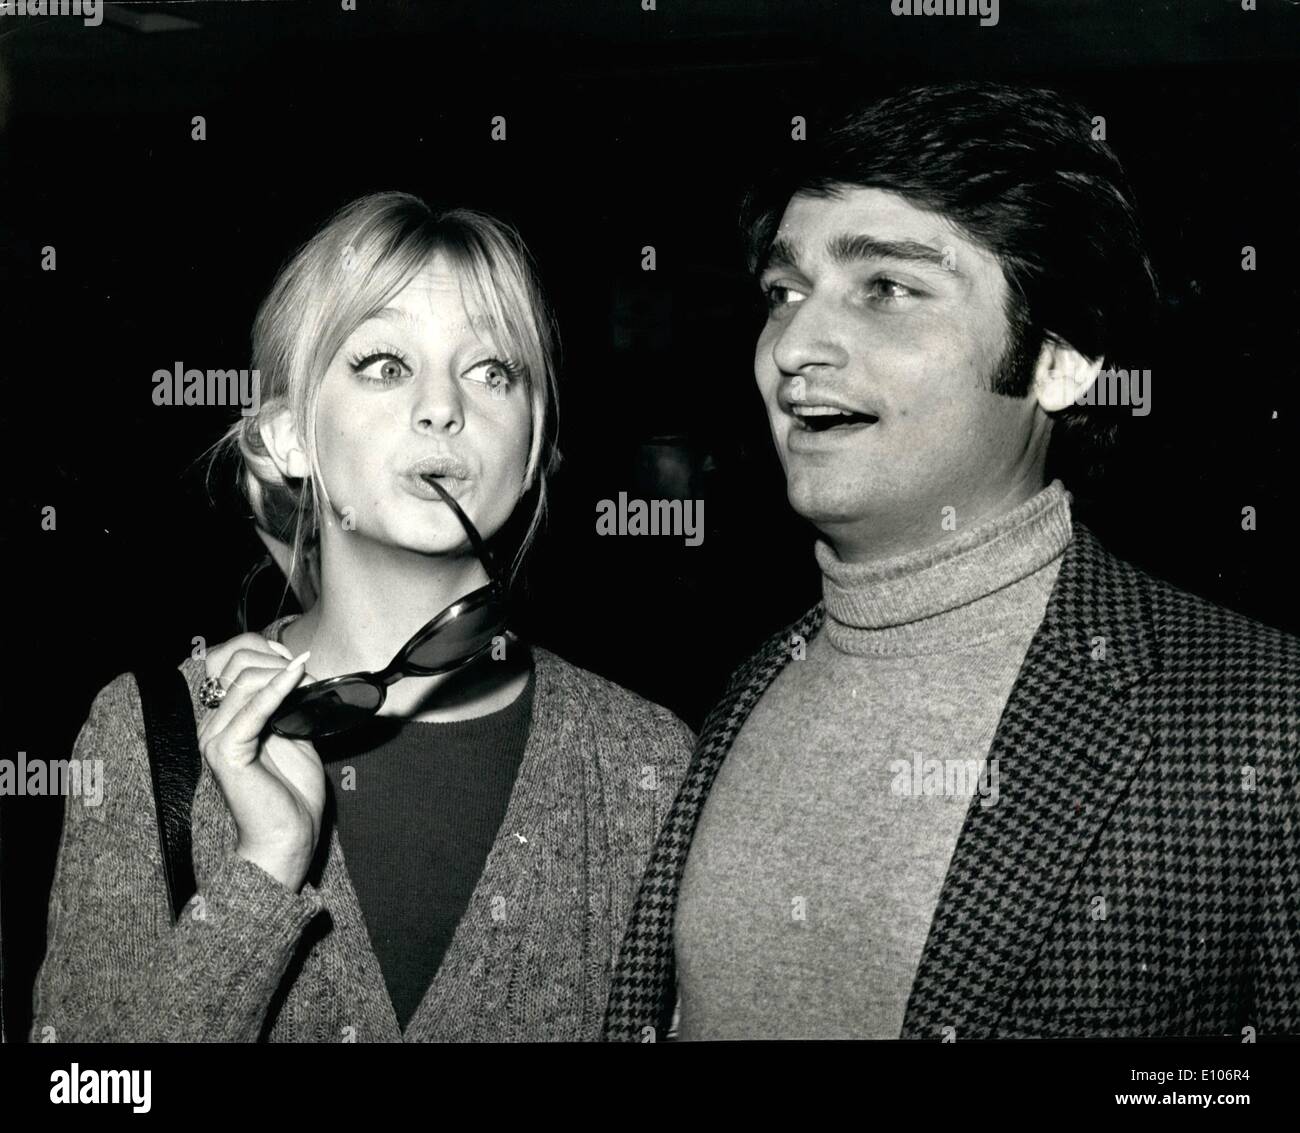 Jan. 29, 1970 - January 29th, 1970 Goldie Hawn arrives. Goldie Hawn, the kooky blonde of the American TV show, The Rowan and Martin Laugh-in seen on British TV, arrived at Heathrow Airport today. Tonight she will be one of the leading guests at the premiere in London's West End, of the film Marooned , which stars Gregory Peck. Goldie has made her first film Cactus Flower , and her second There's a Girl in My Soup will be made in Britain. Photo Shows: Goldie Hawn pictured on her arrival at Heathrow Airport, with her husband, Gus Trekonis. Stock Photo